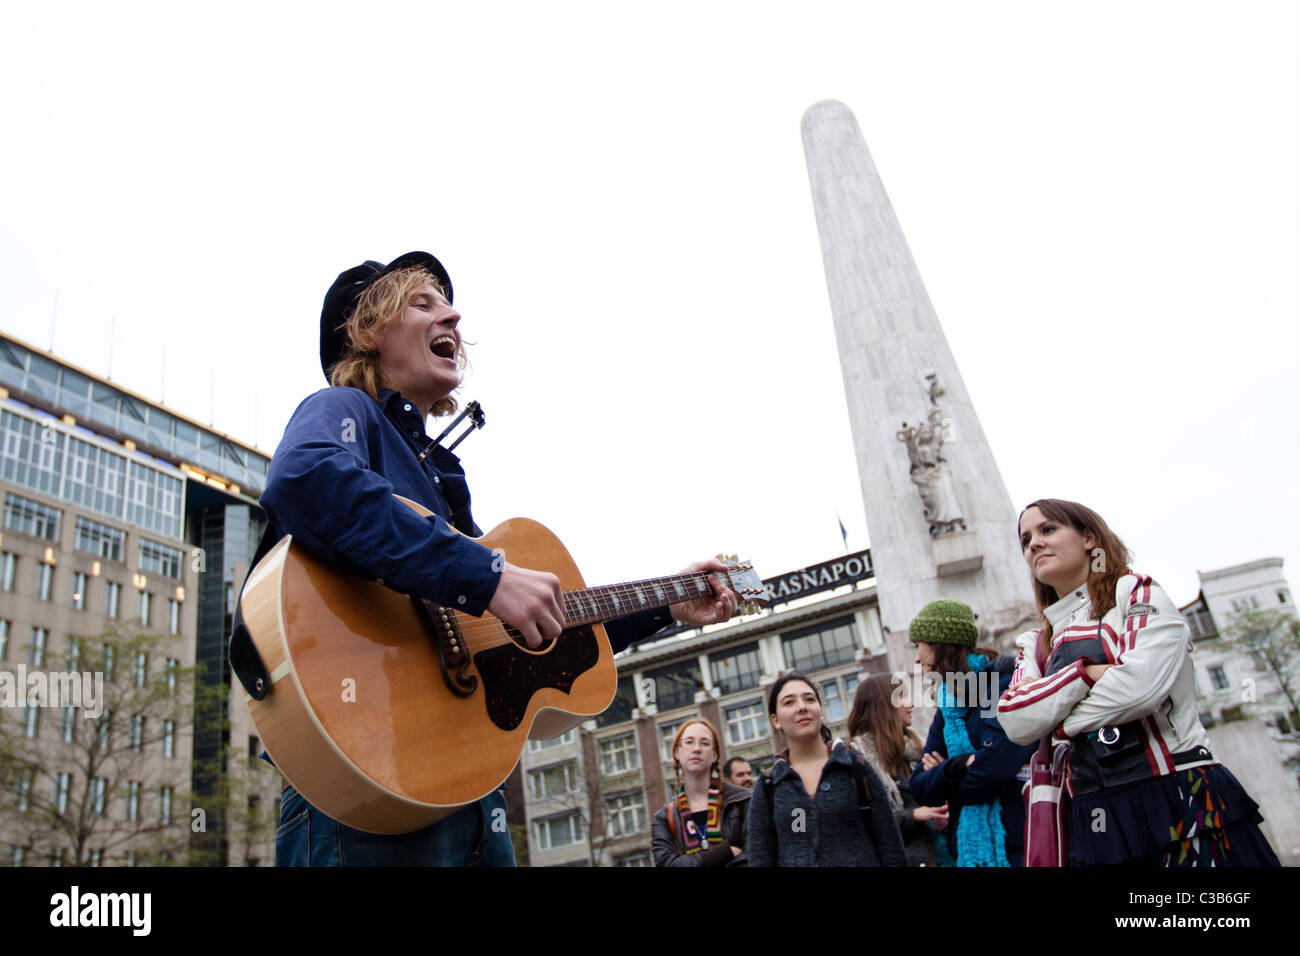 A musician entertains the crowd at Dam Square in Amsterdam Stock Photo